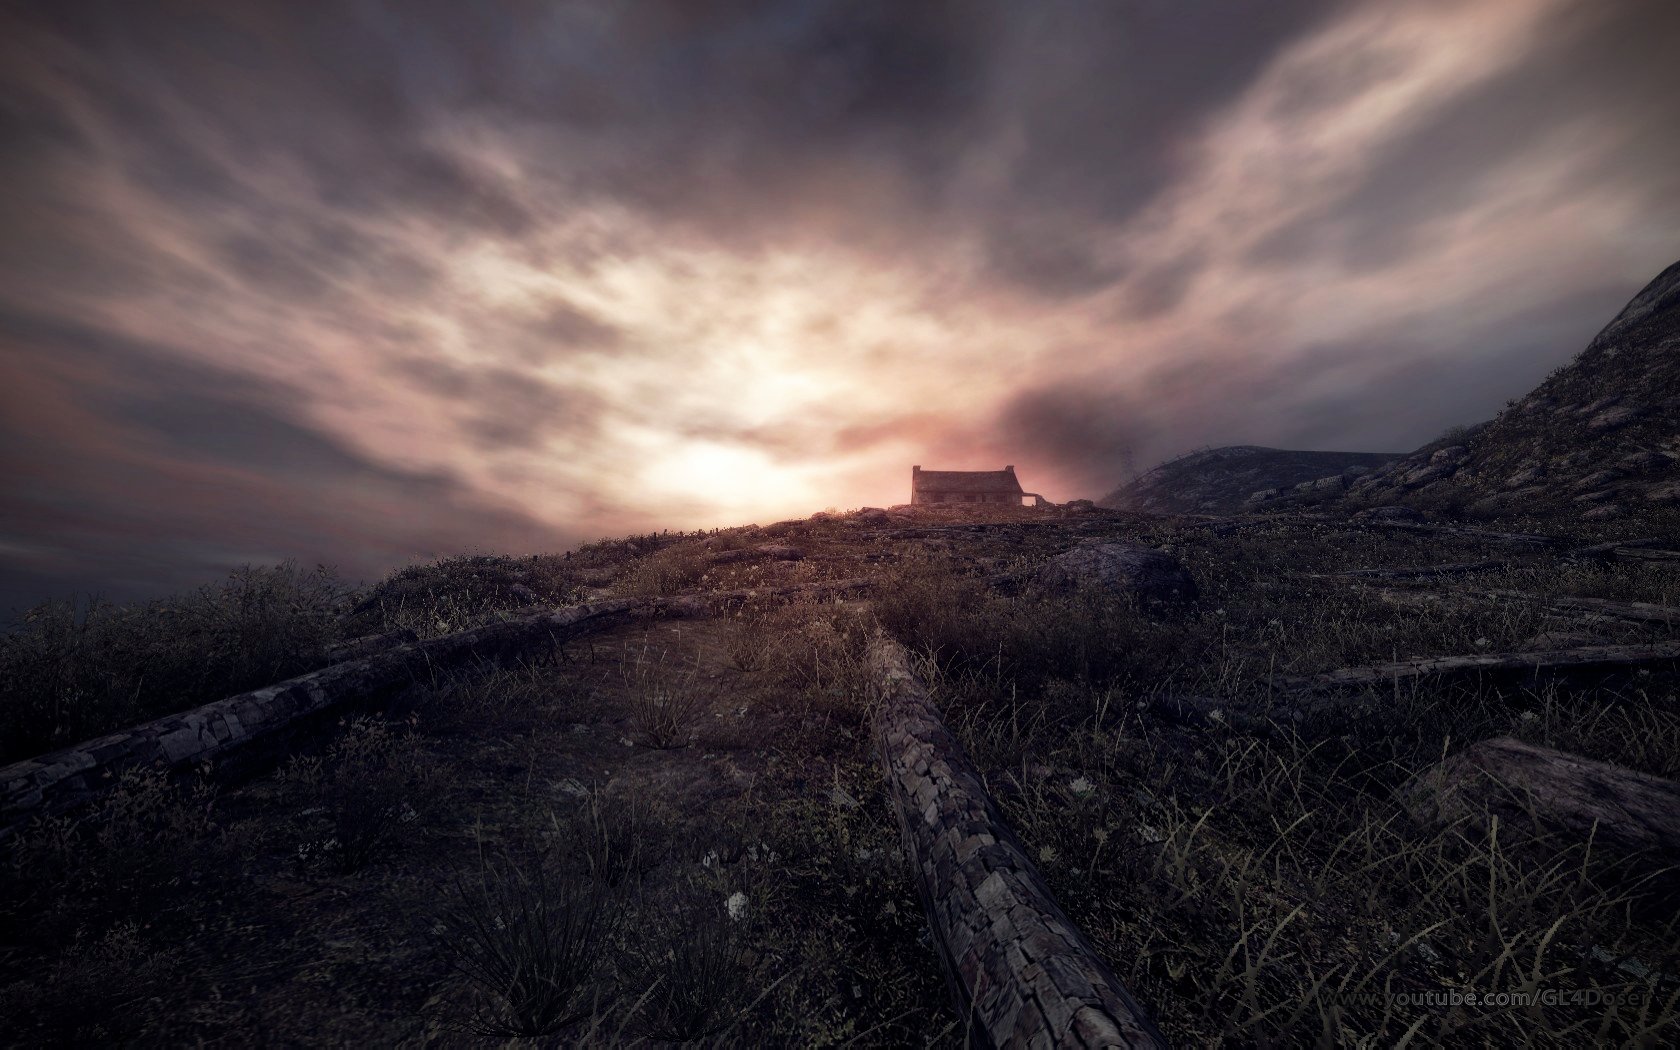 dear esther full game download